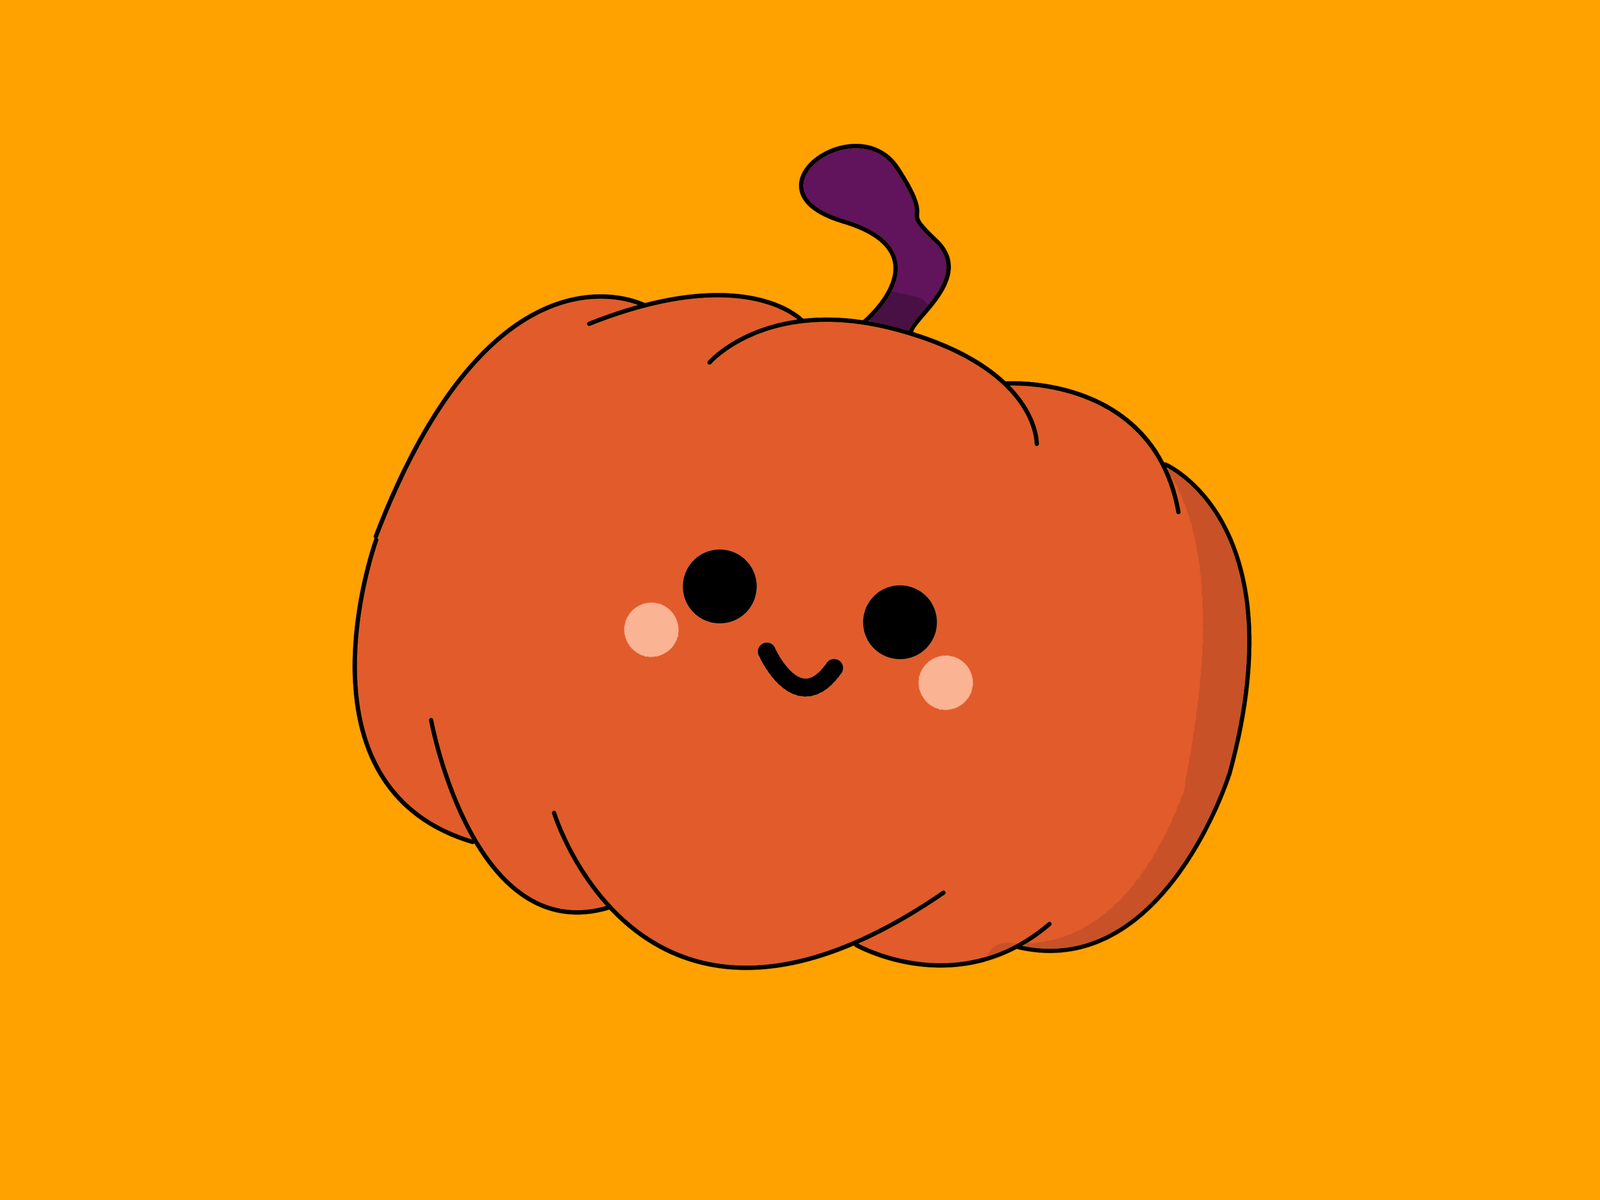 Pumpkin by THE LADY on Dribbble